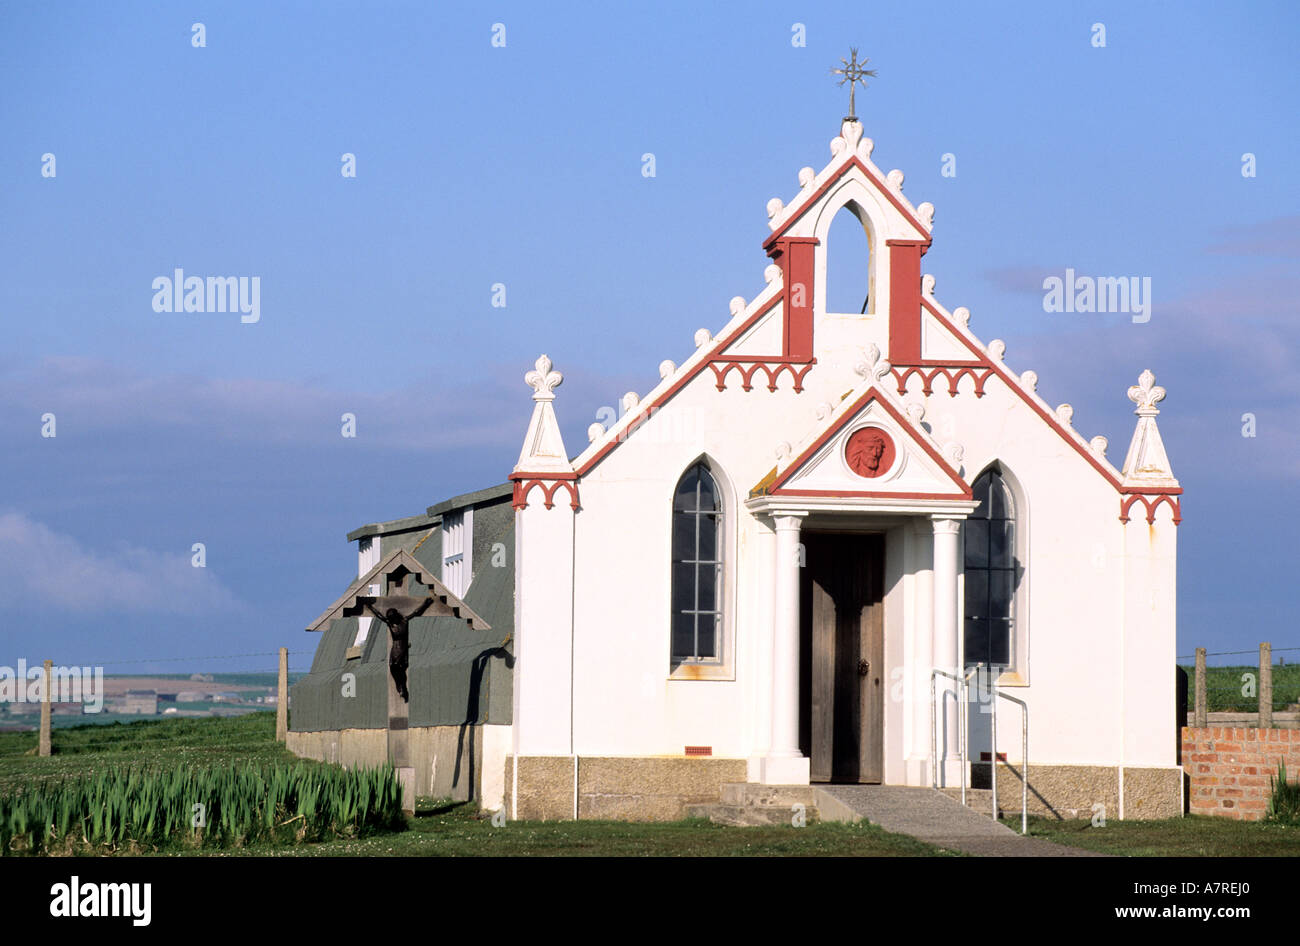 United Kingdom, Scotland, Orkney Islands, Mainland at Lamb Holm, the Italian Chapel from WWII Stock Photo